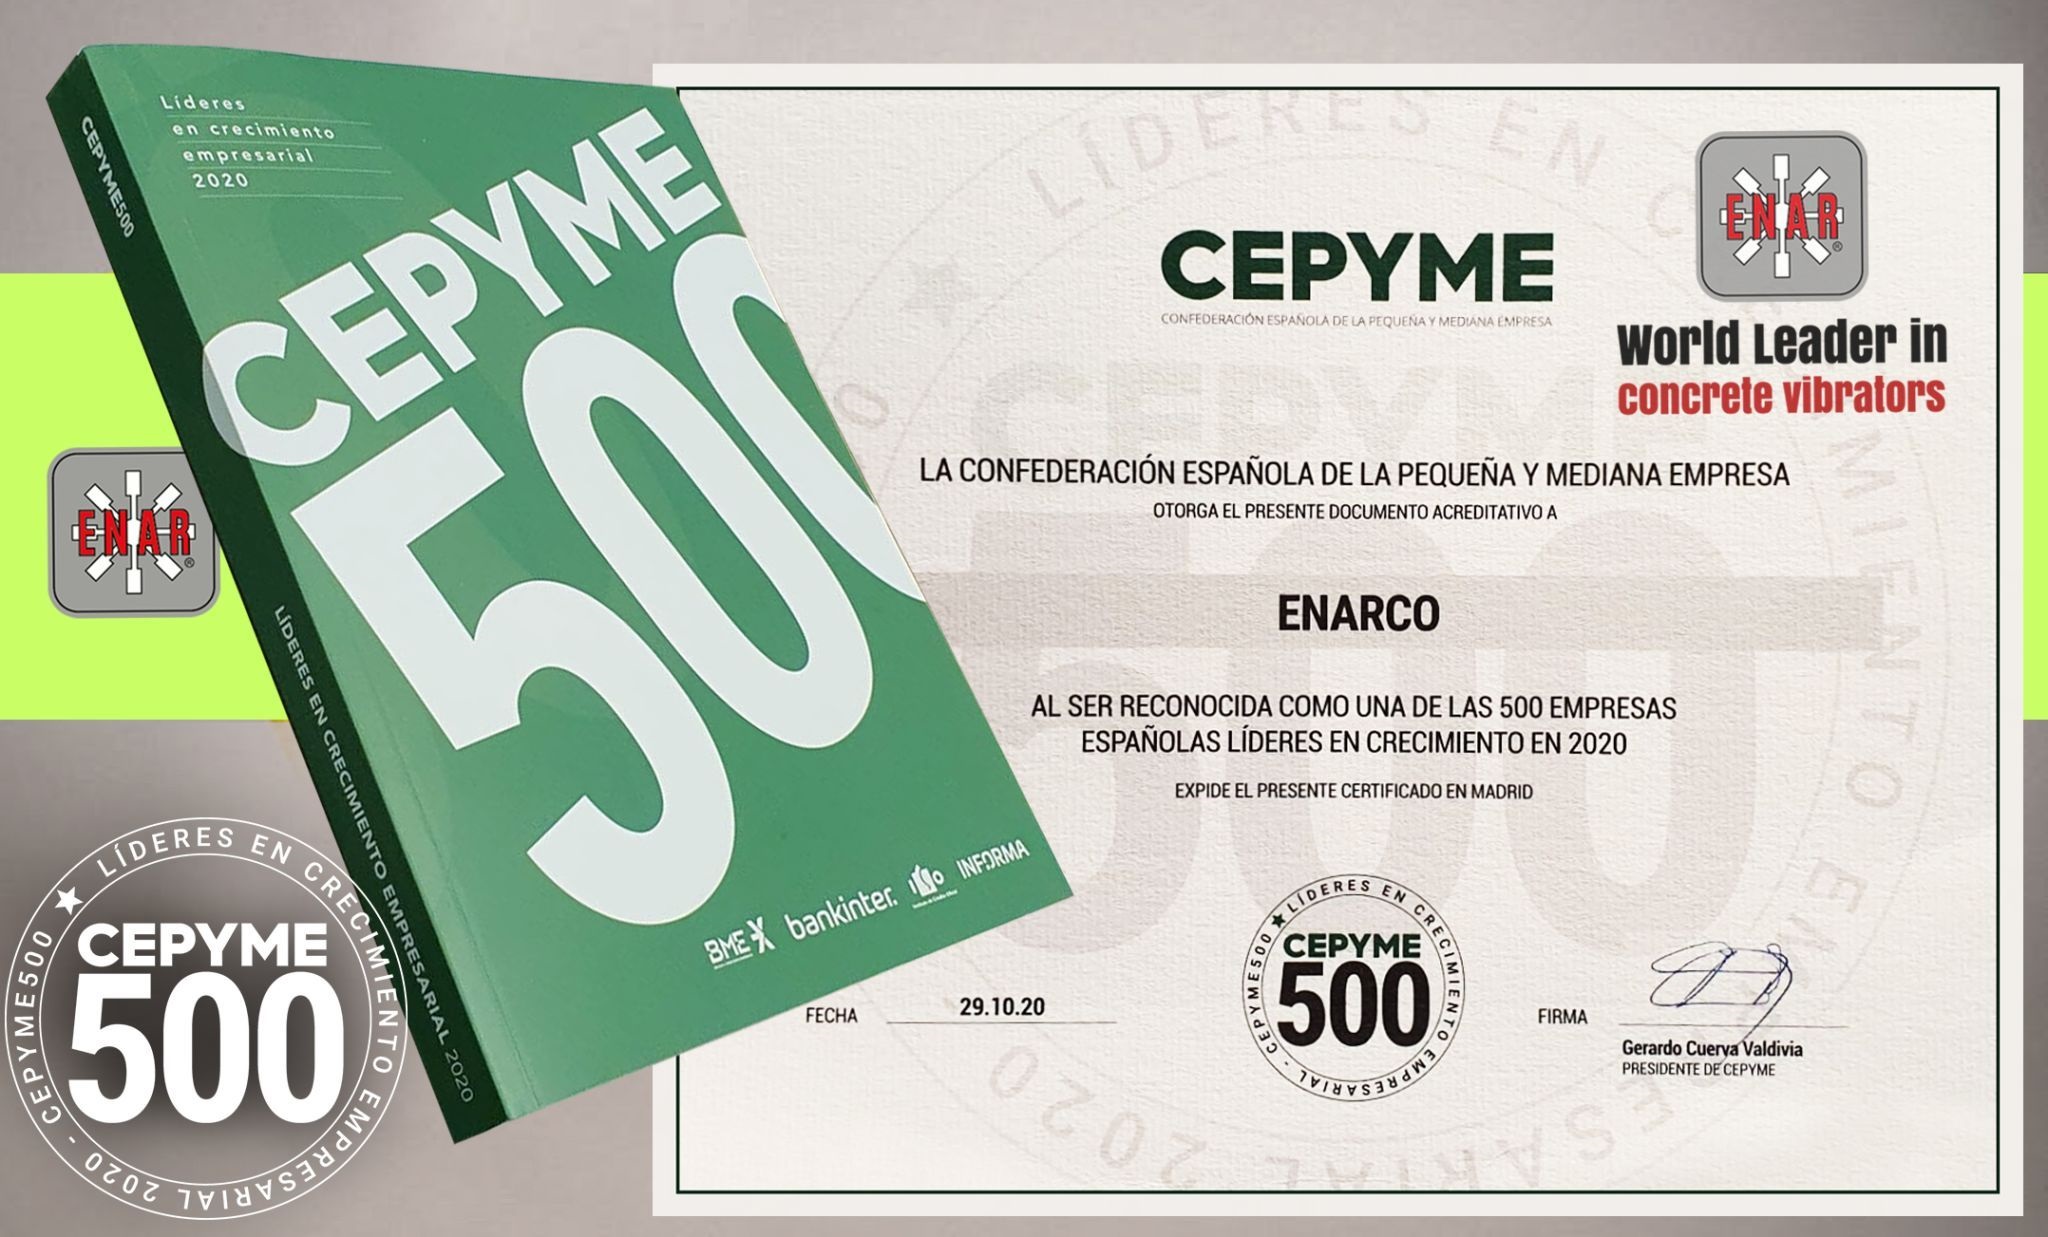 ENAR is recognized by CEPYME as one of the Top 500 Growth Leader Spanish Enterprises in 2020